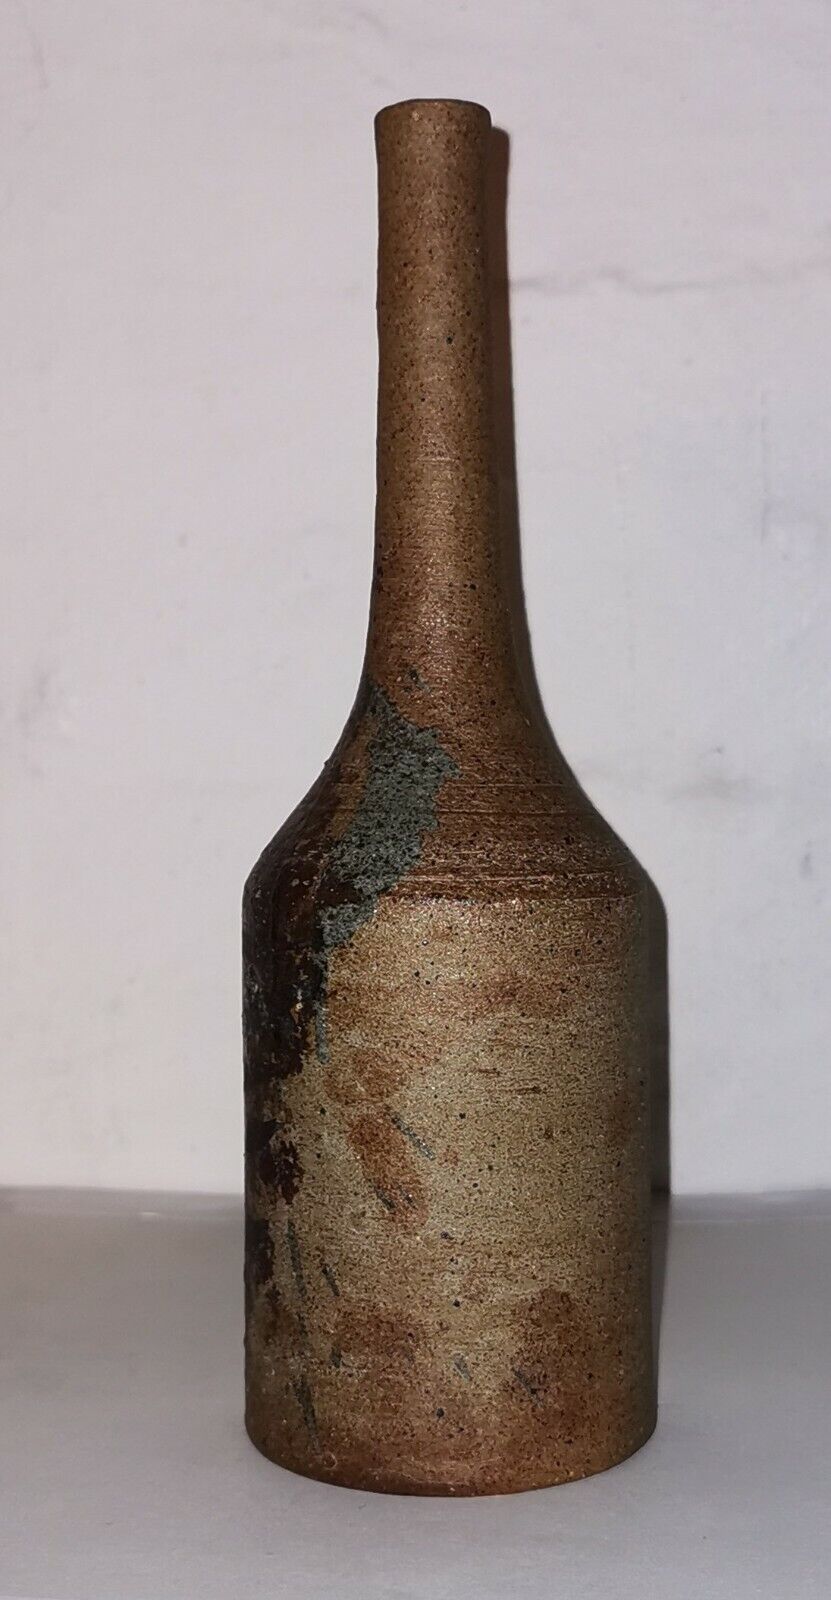 Vintage bottle shaped vase with long neck made by Conny Walther Denmark c 1970